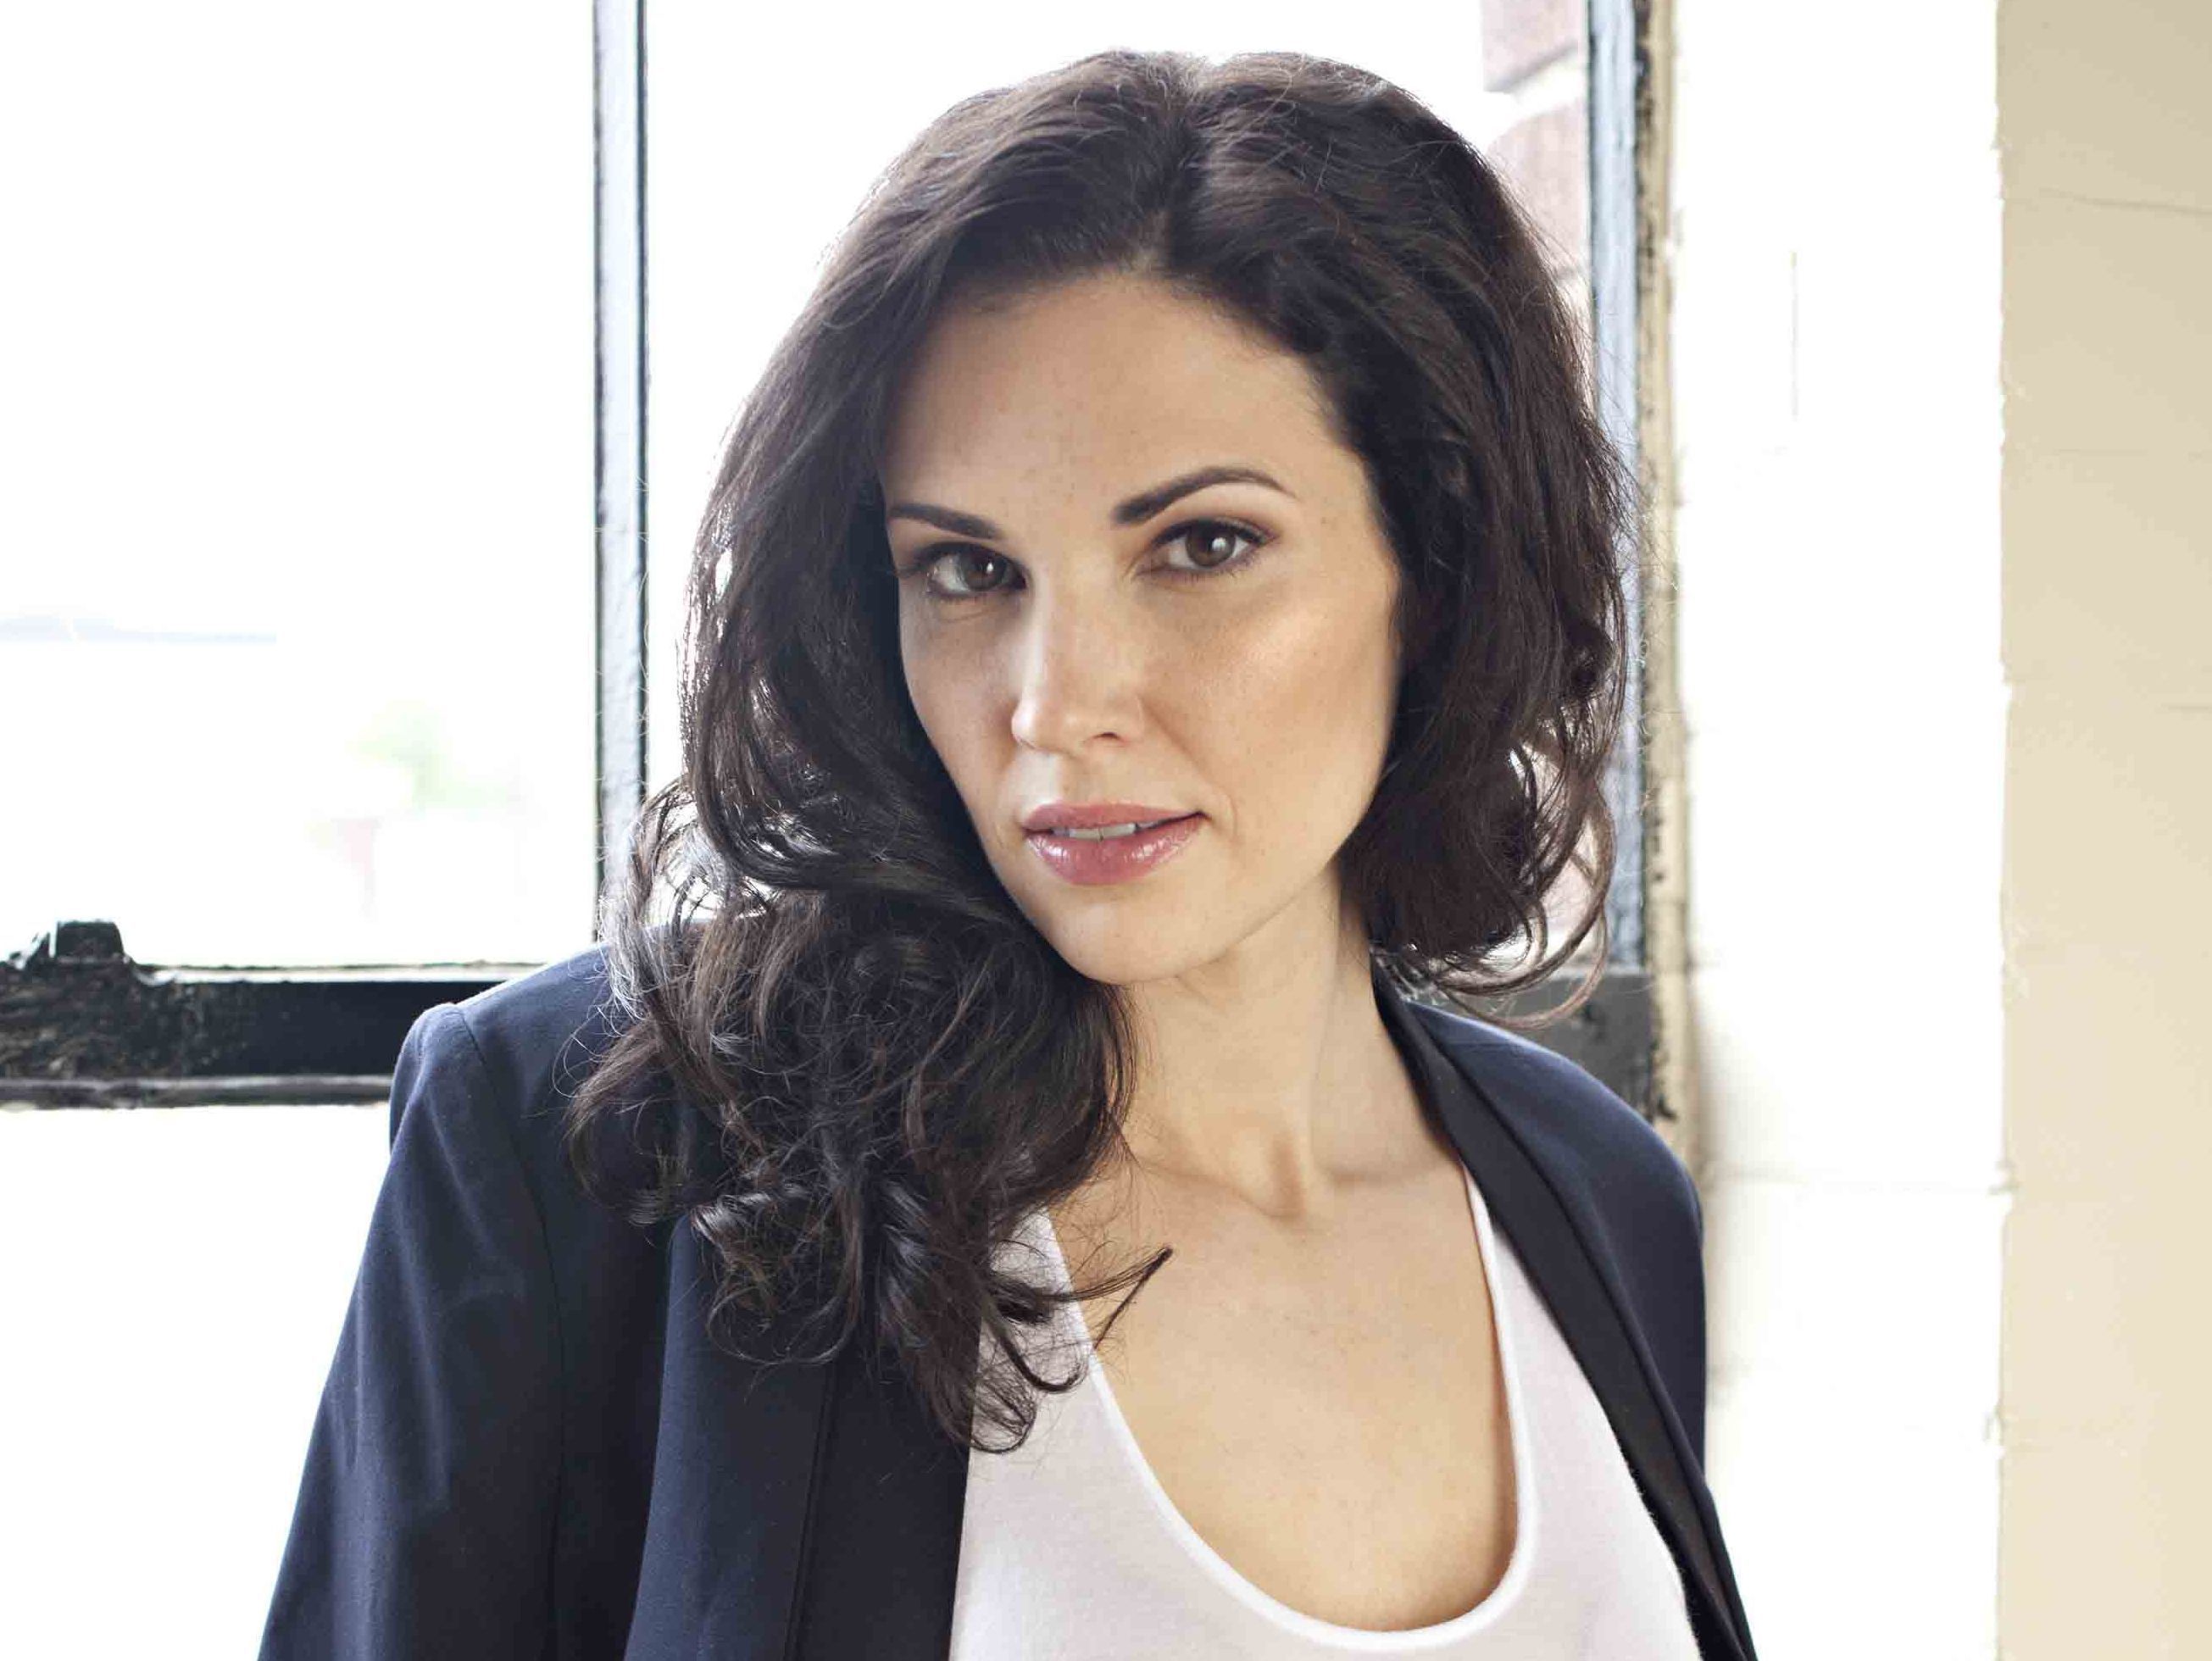 Laura Mennell Wallpapers